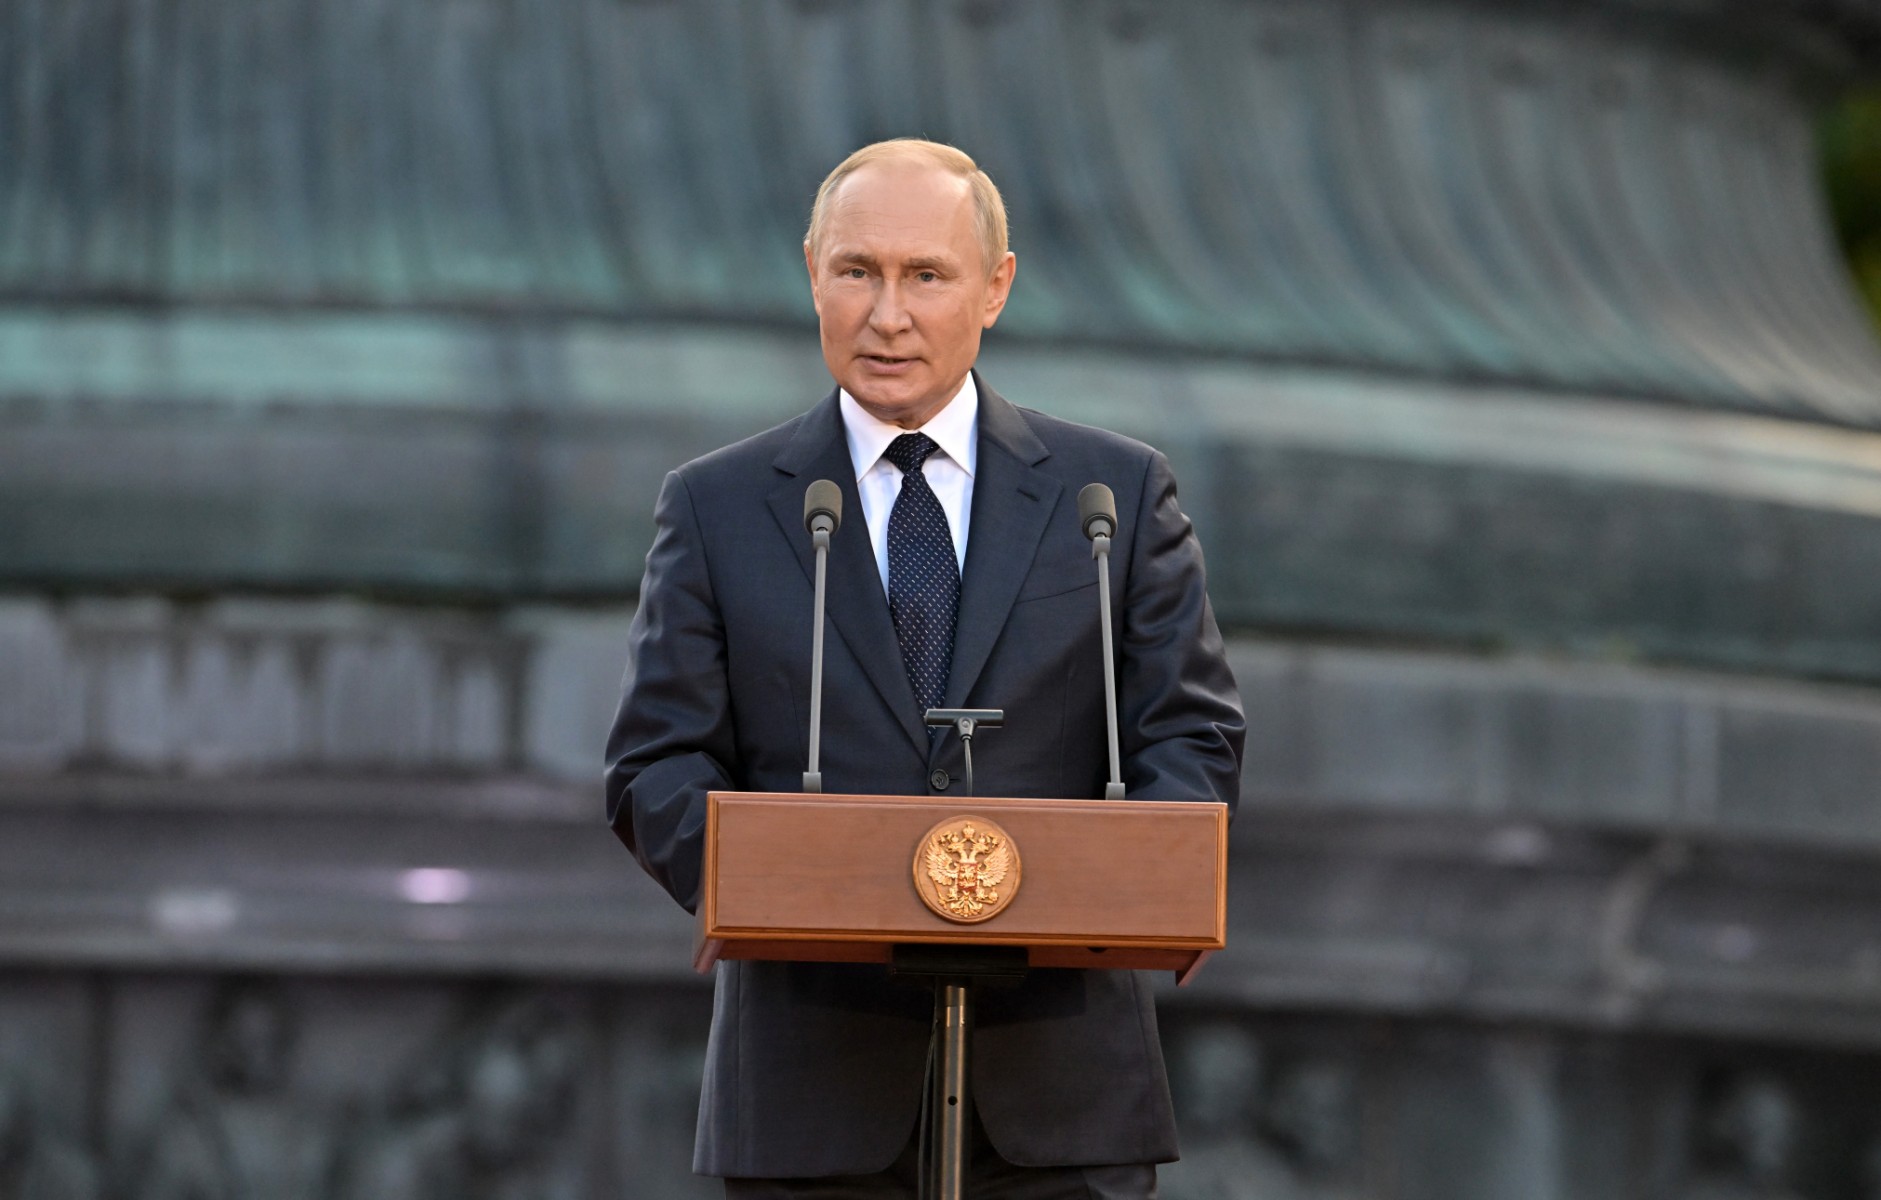 Putin: Ukrainian military is being exploited as "cannon fodder" 